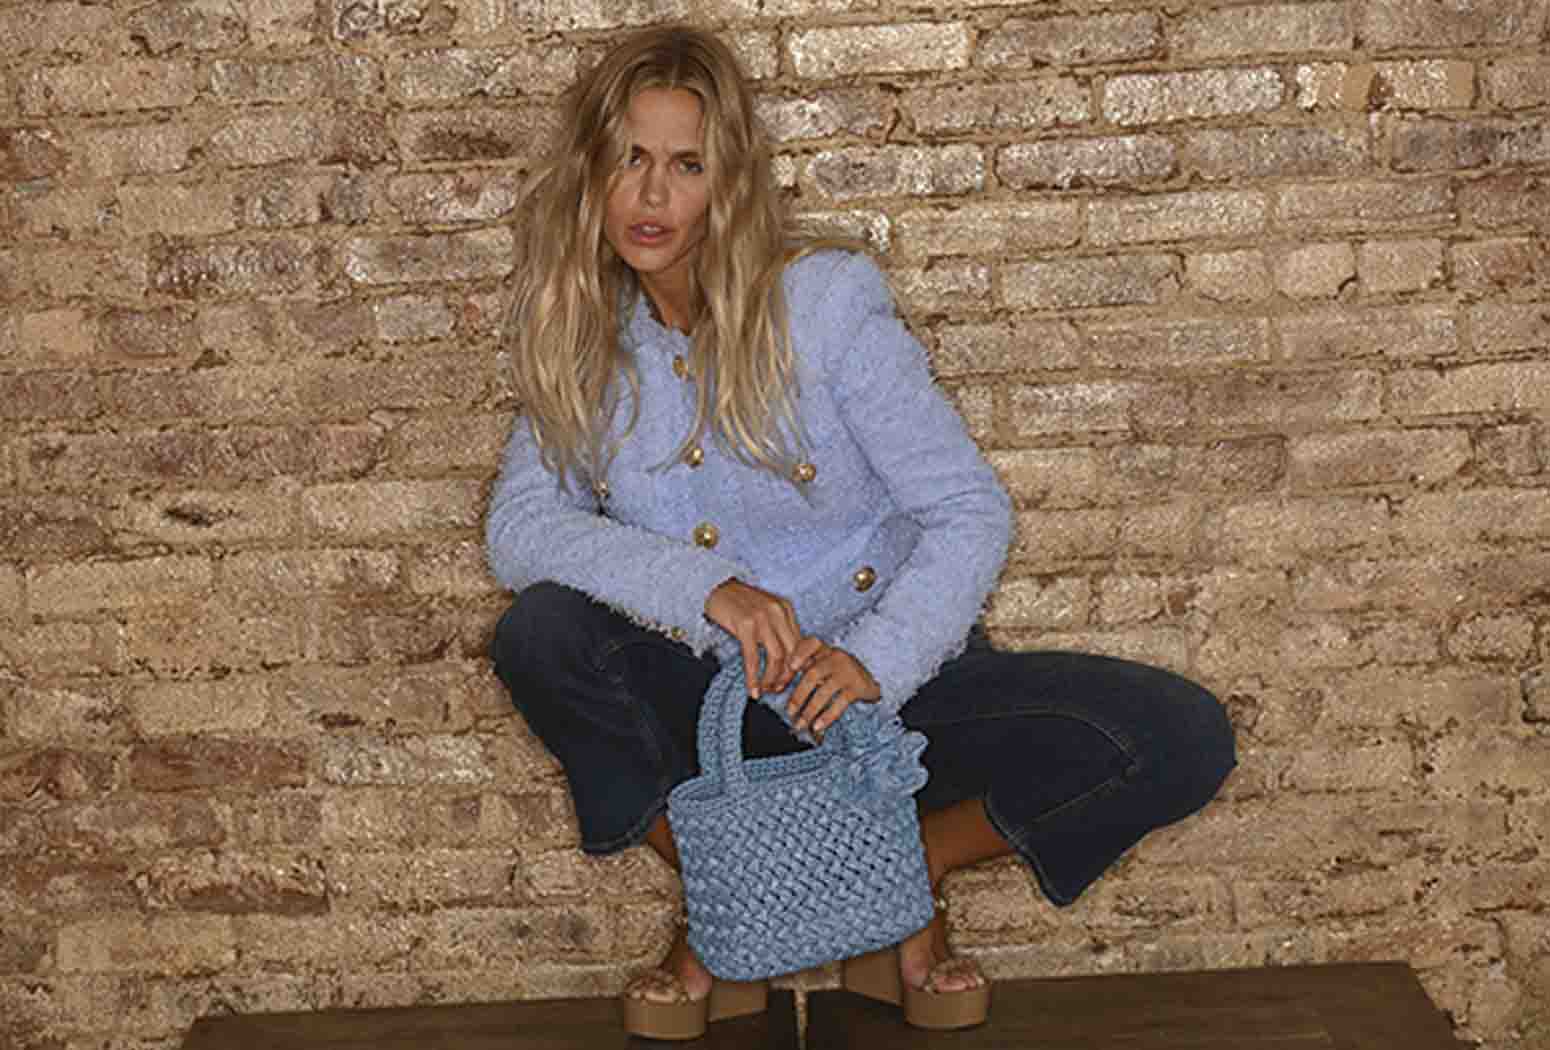 The latest in eco-chic fashion: Raffia Bags Made in Italy